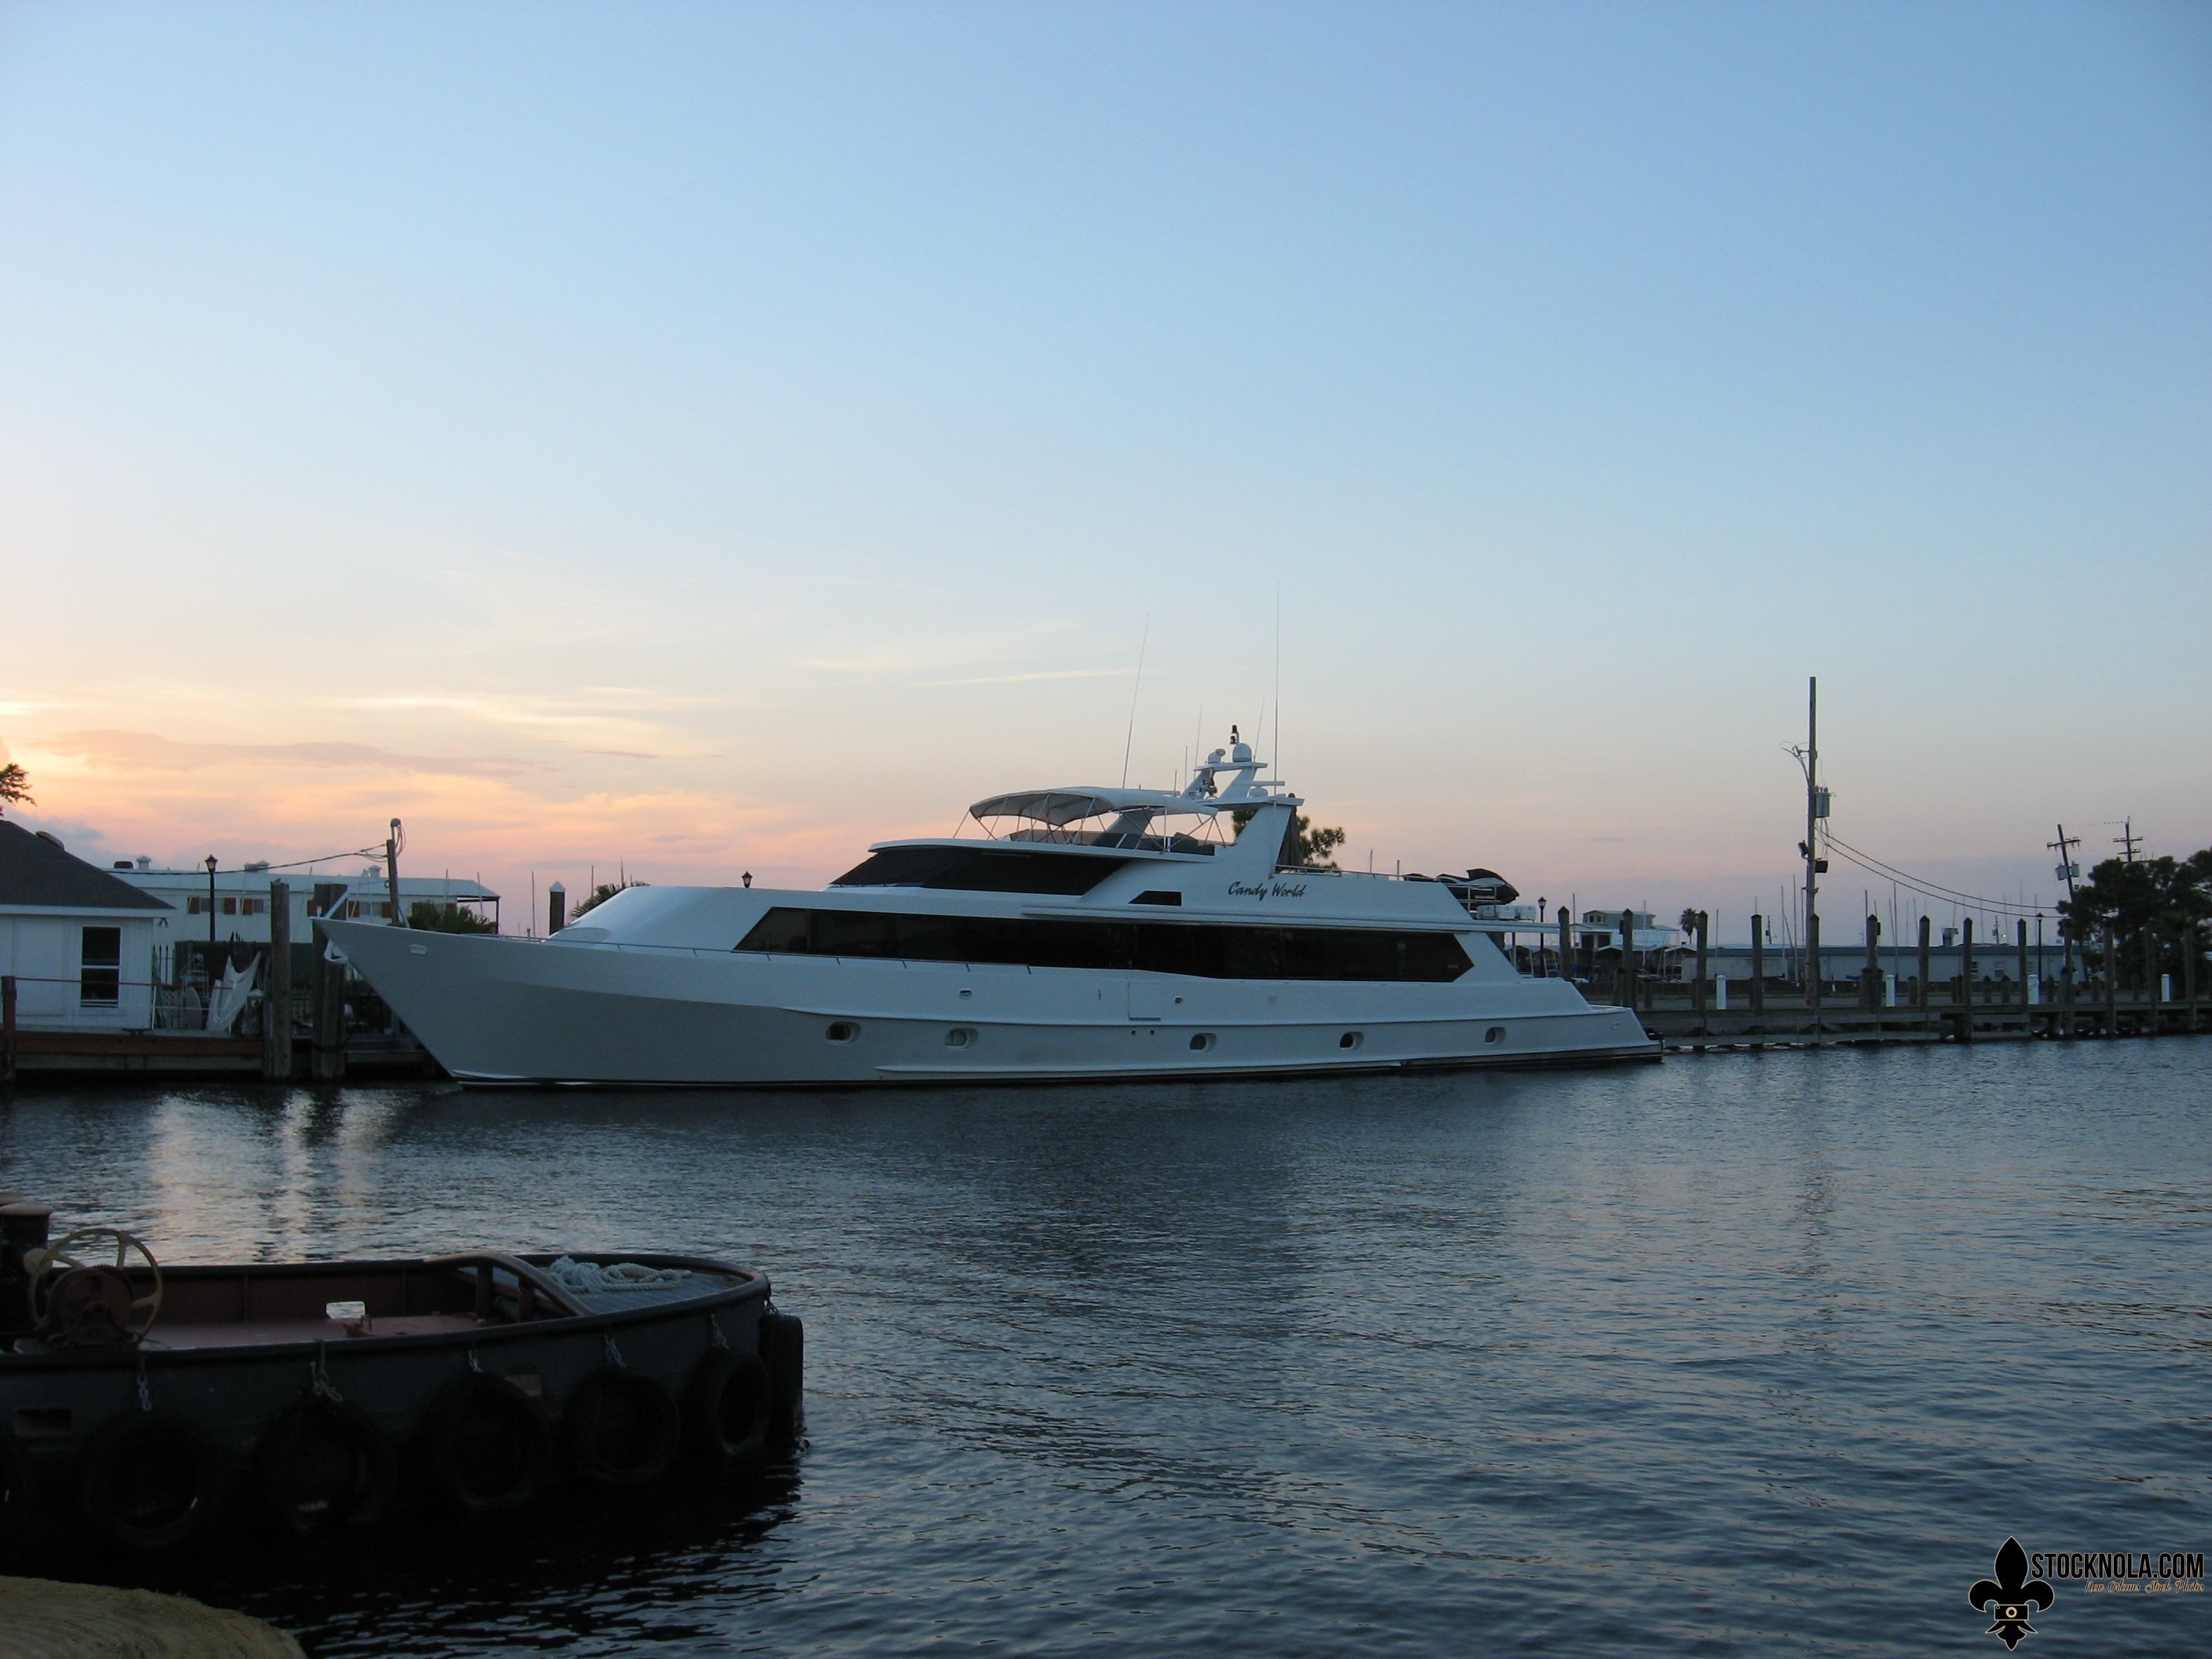 who owns candy world yacht in new orleans